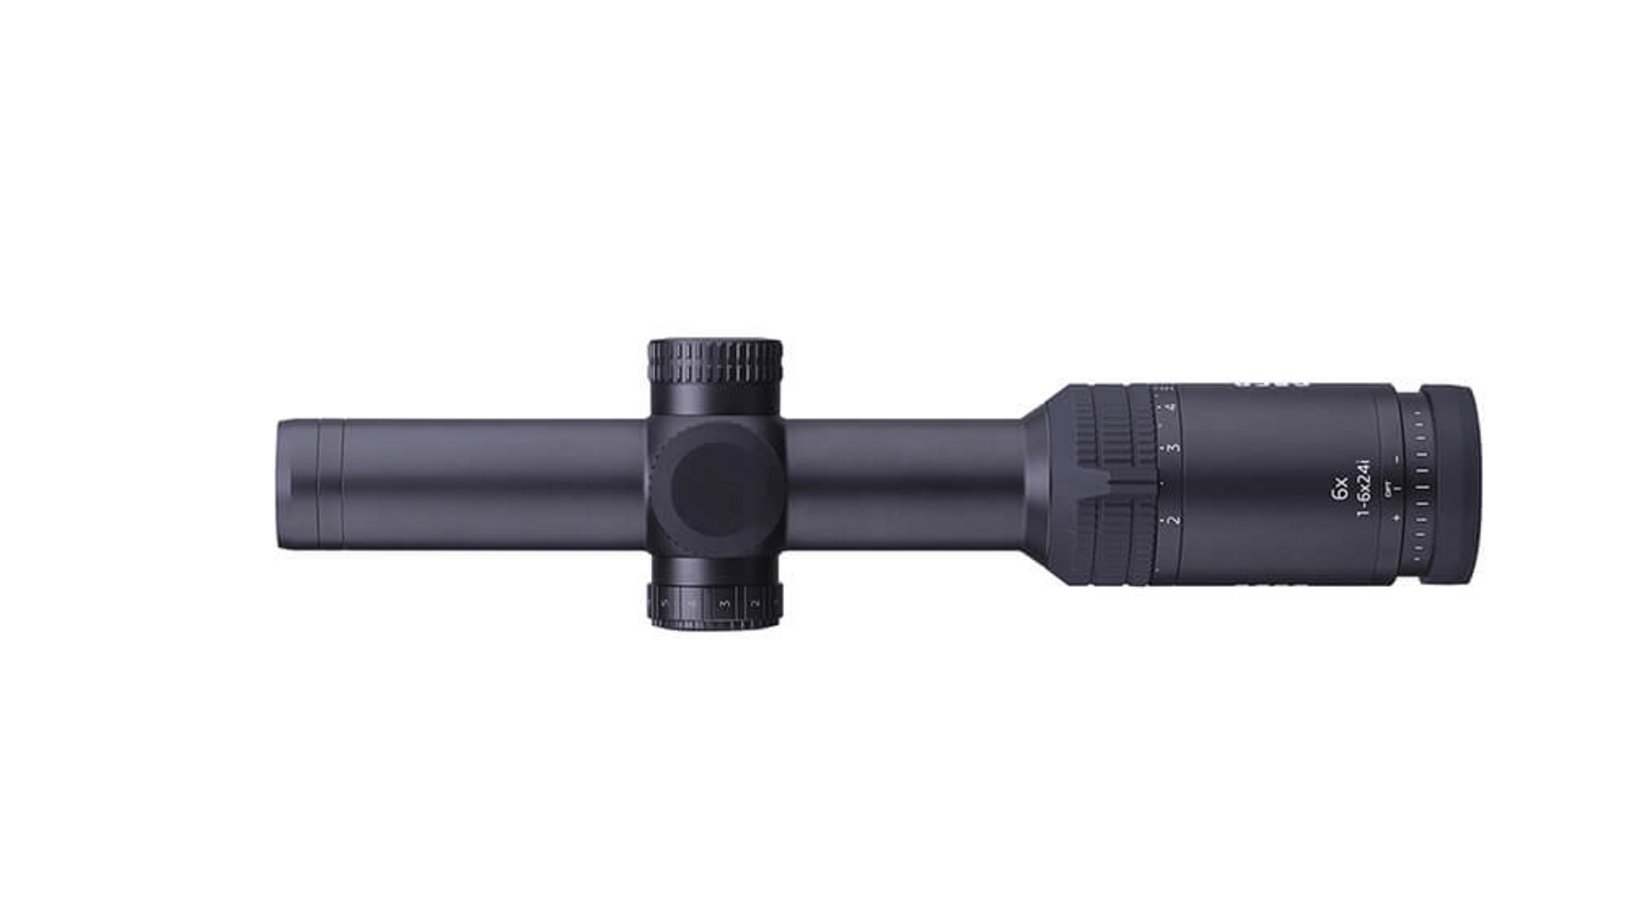 Top view image of the GECO Riflescope Gold 1-6x24i